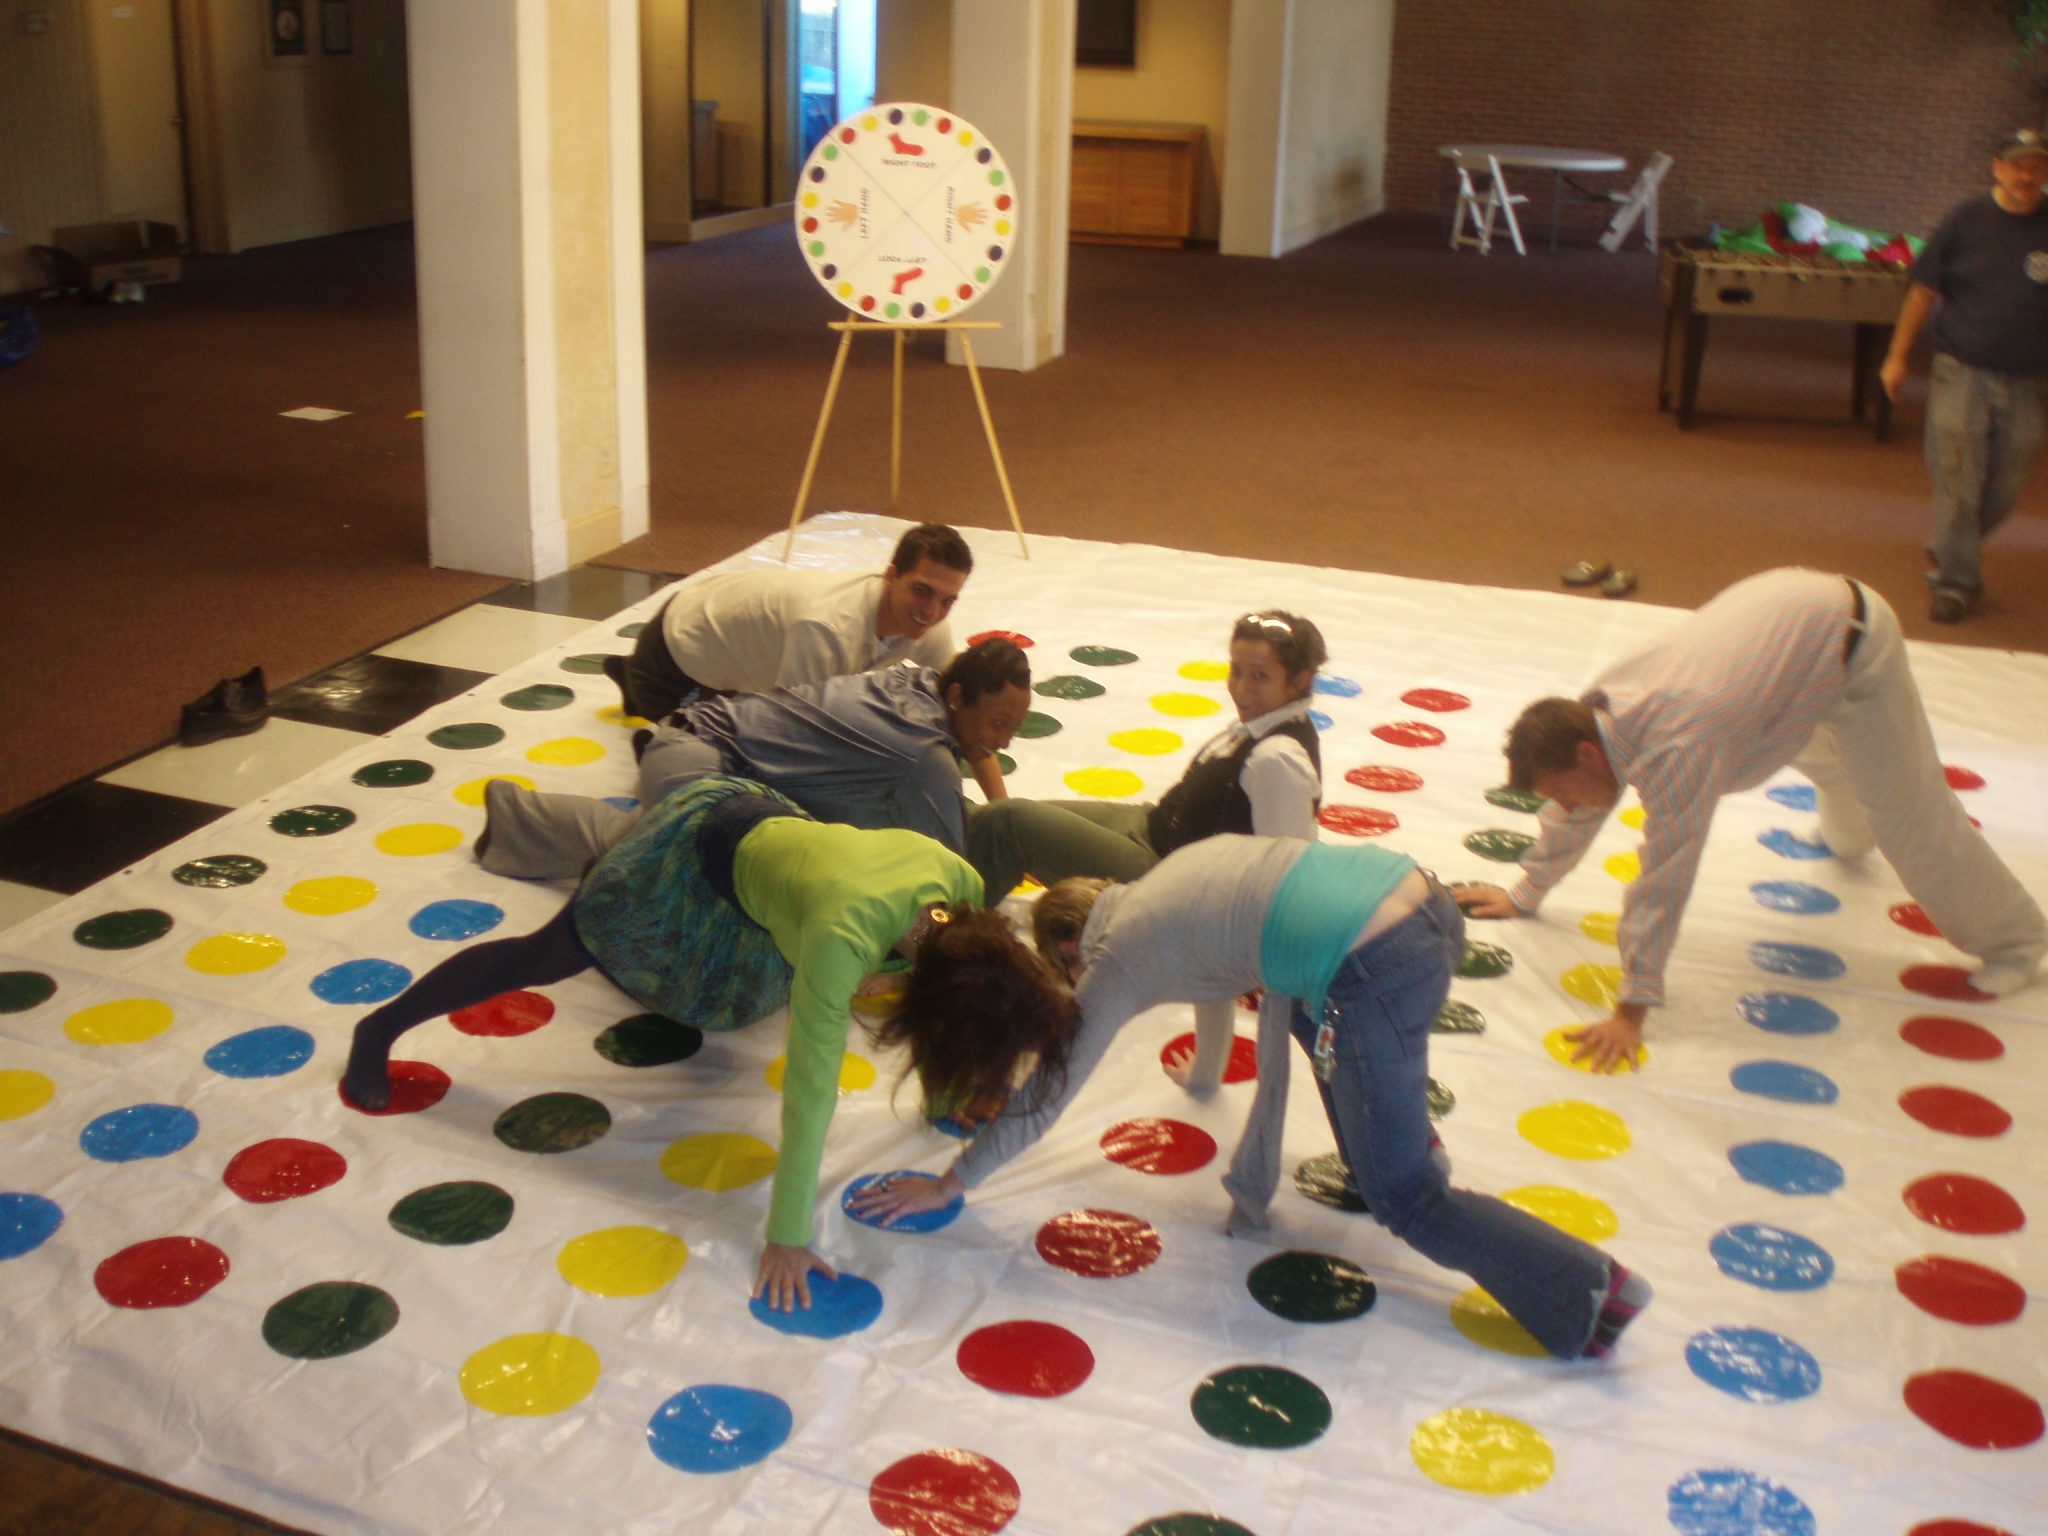 Game Twister